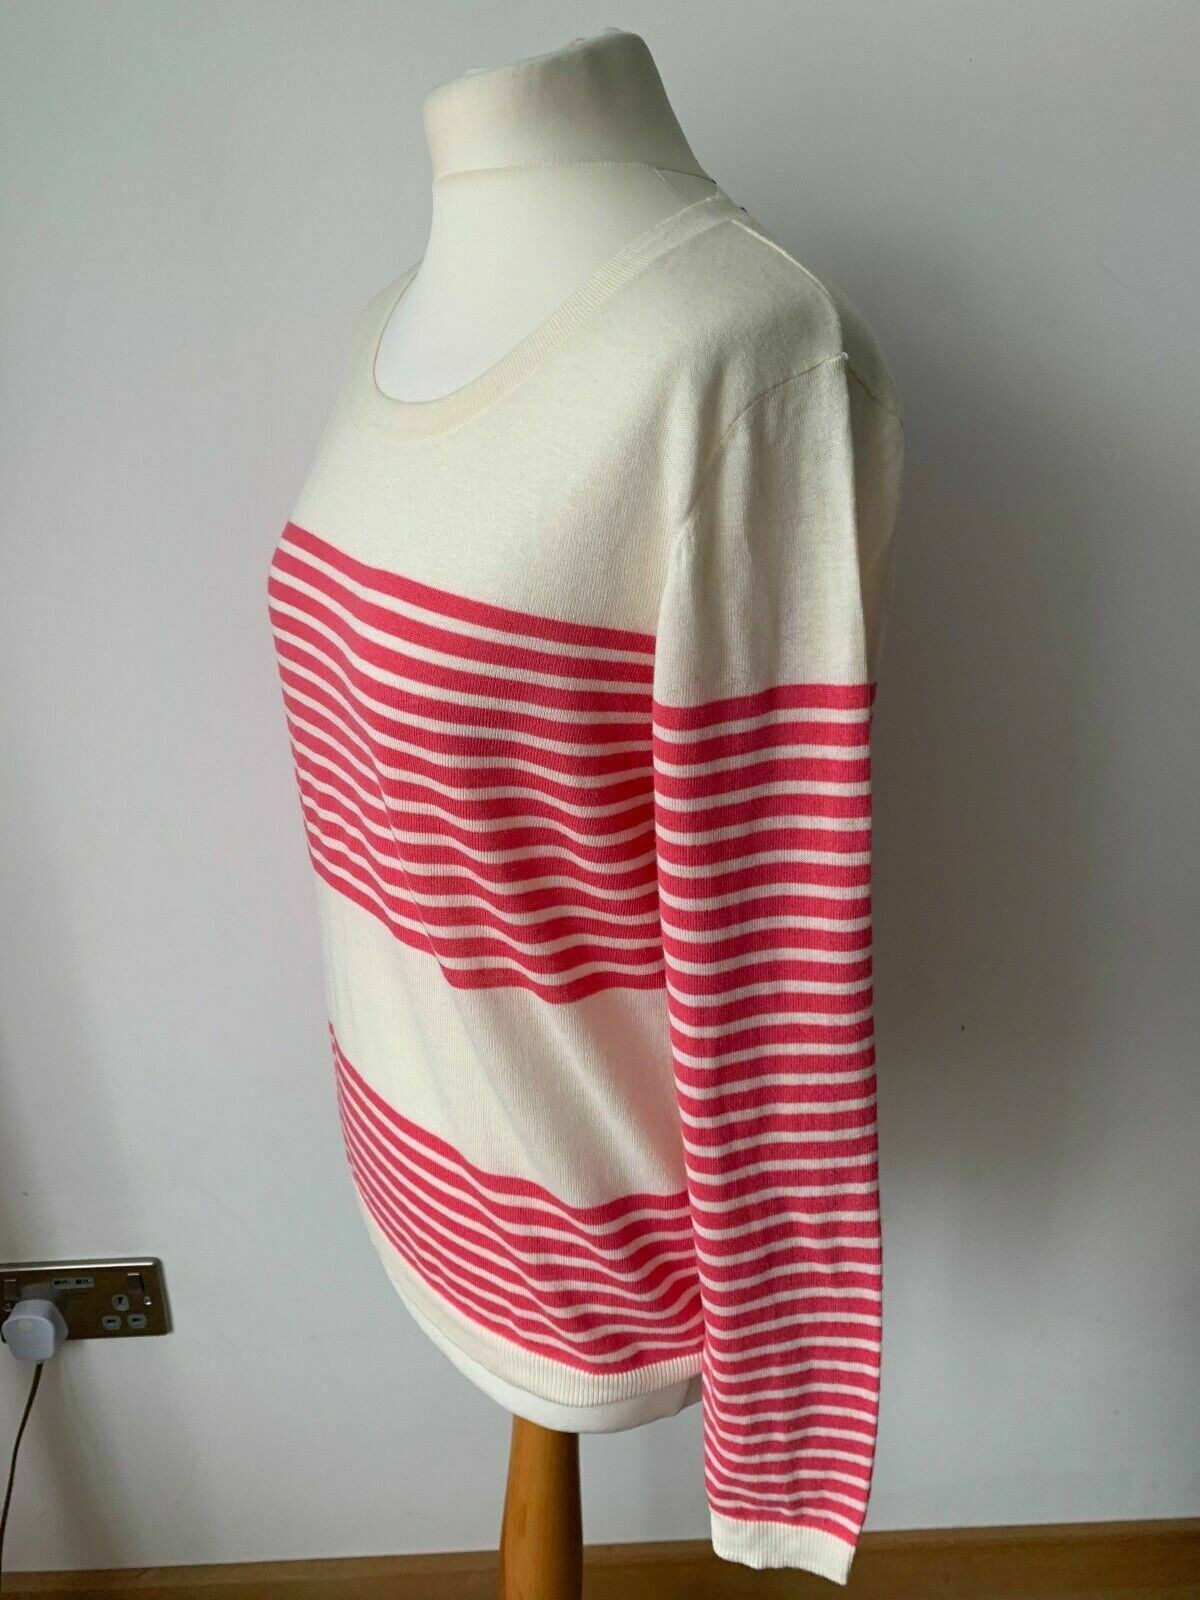 Great Plains Pink and Cream Jumper Size XL Striped